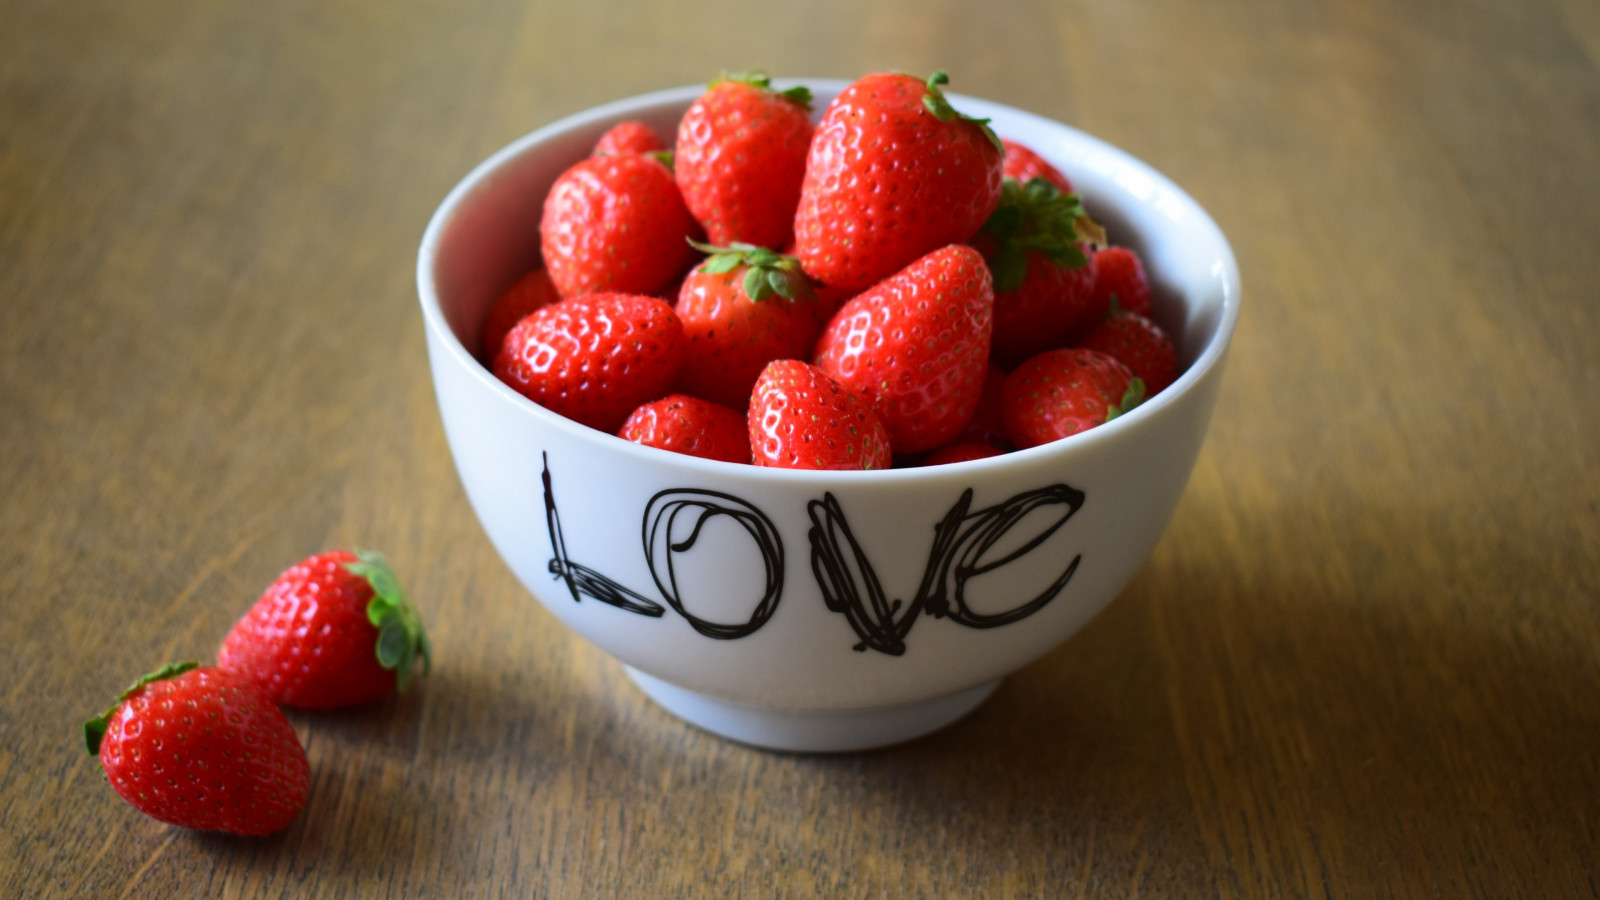 Strawberries with love wallpaper 1600x900